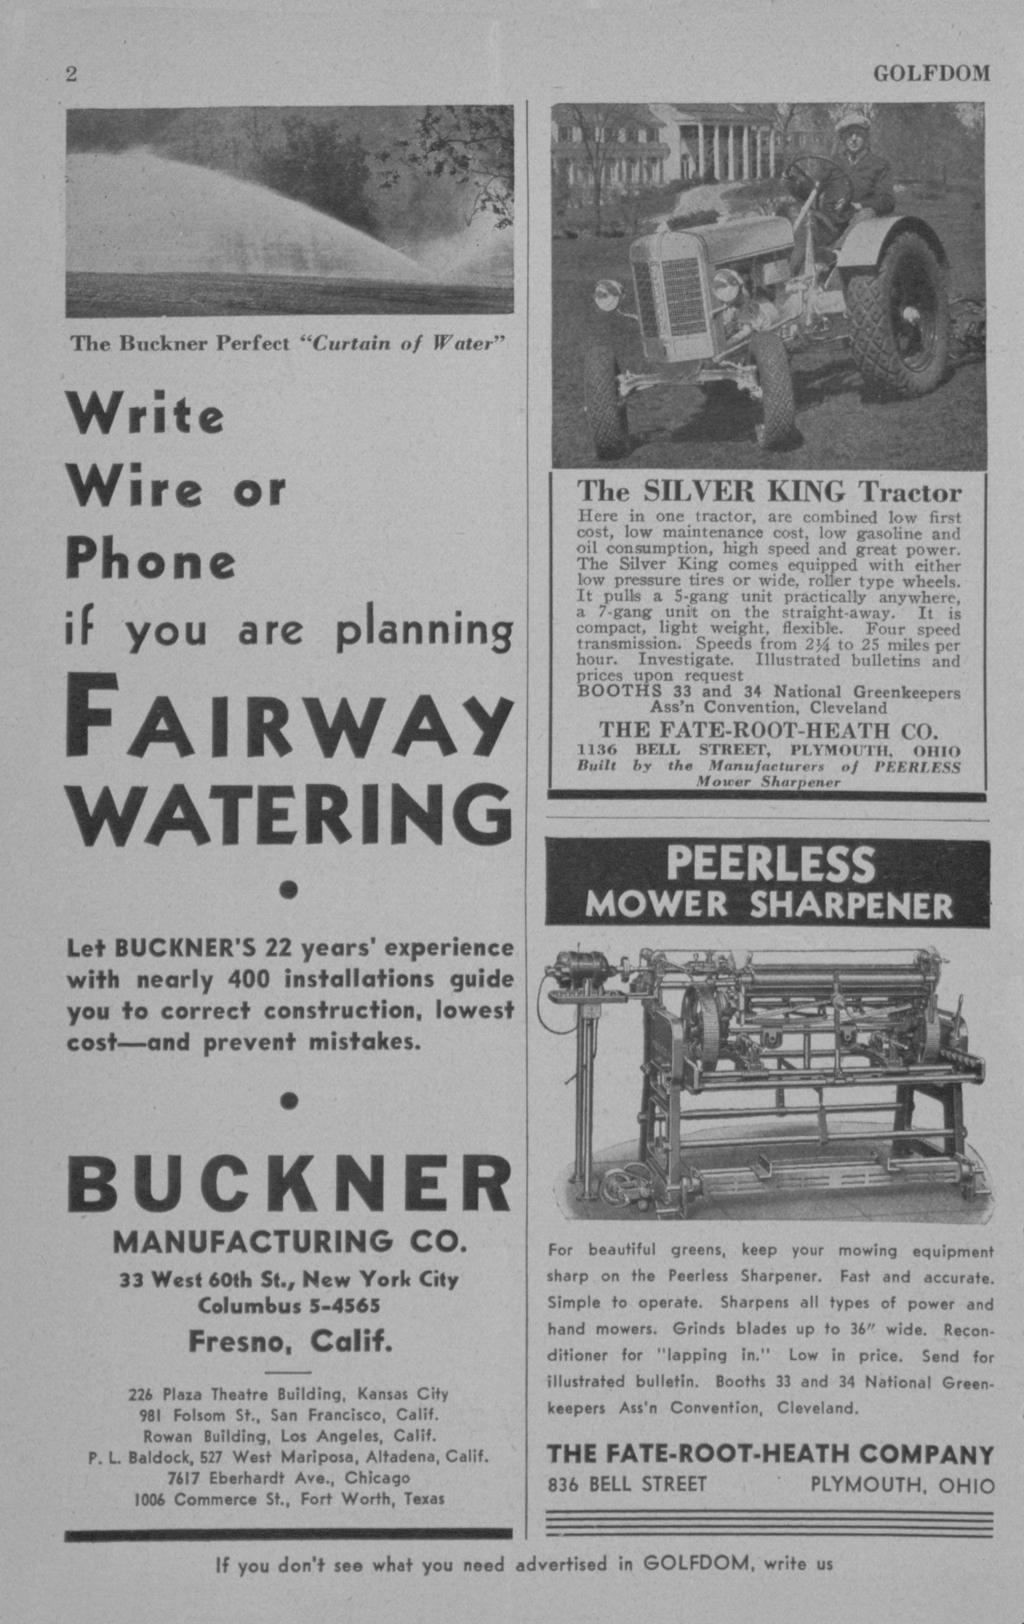 The Btickner Perfect "Curtain of Write Wire or Phone Water" if you are planning FAIRWAY WATERING Let BUCKNER'S 22 years' experience with nearly 400 installations guide you to correct construction,